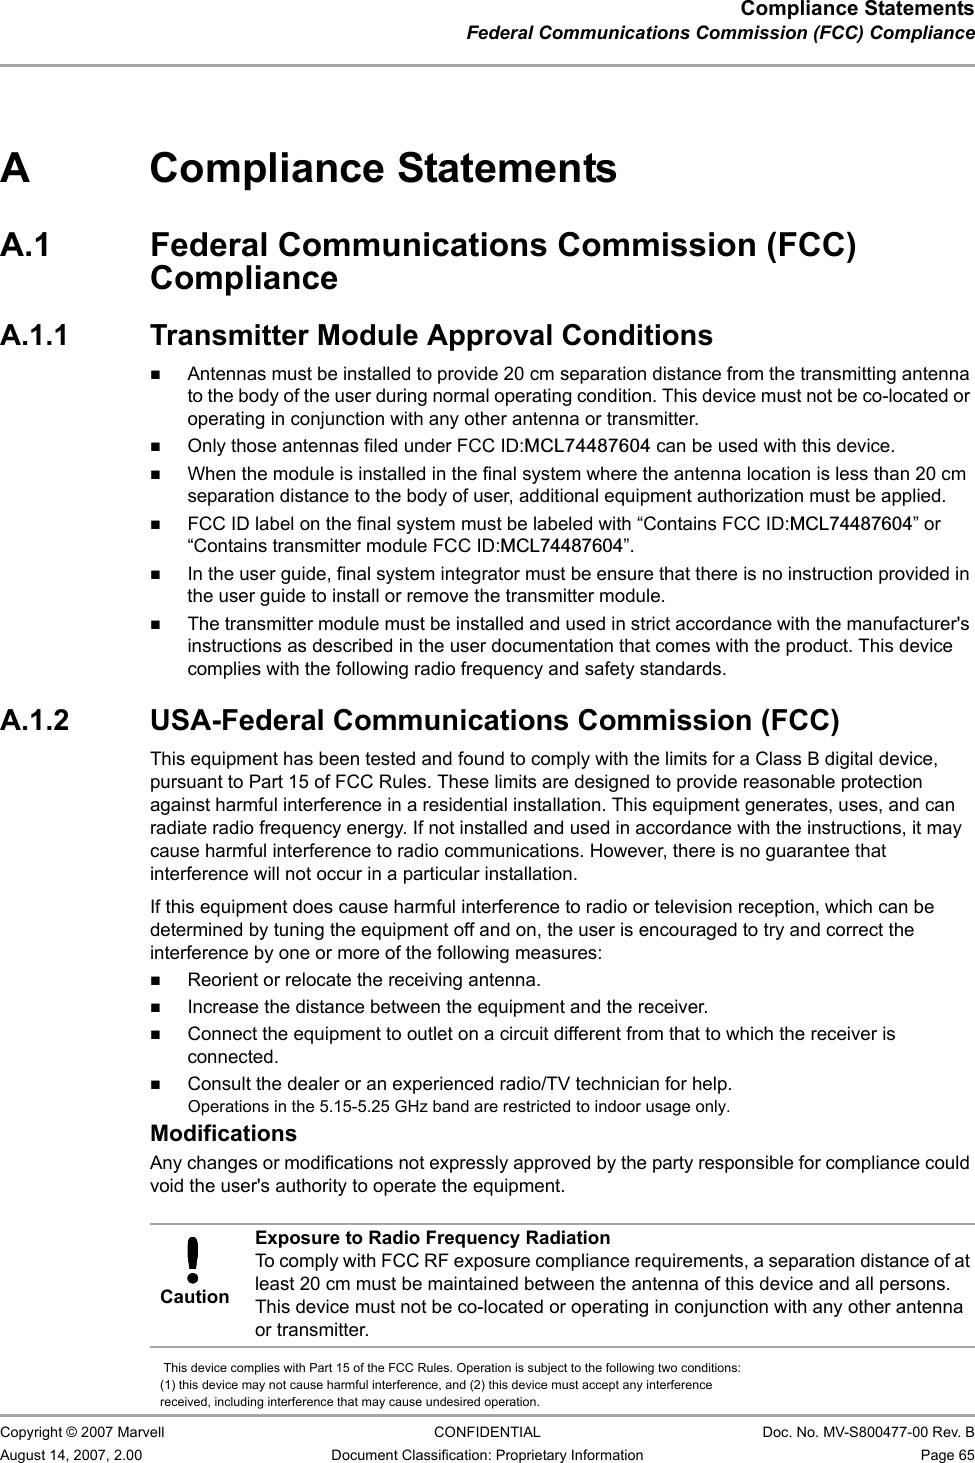 Compliance StatementsFederal Communications Commission (FCC) Compliance                         Copyright © 2007 Marvell CONFIDENTIAL Doc. No. MV-S800477-00 Rev. BAugust 14, 2007, 2.00 Document Classification: Proprietary Information Page 65 A Compliance StatementsA.1 Federal Communications Commission (FCC) ComplianceA.1.1 Transmitter Module Approval ConditionsAntennas must be installed to provide 20 cm separation distance from the transmitting antenna to the body of the user during normal operating condition. This device must not be co-located or operating in conjunction with any other antenna or transmitter. Only those antennas filed under FCC ID:MCL74487604 can be used with this device.When the module is installed in the final system where the antenna location is less than 20 cm separation distance to the body of user, additional equipment authorization must be applied. FCC ID label on the final system must be labeled with “Contains FCC ID:MCL74487604” or “Contains transmitter module FCC ID:MCL74487604”.In the user guide, final system integrator must be ensure that there is no instruction provided in the user guide to install or remove the transmitter module.The transmitter module must be installed and used in strict accordance with the manufacturer&apos;s instructions as described in the user documentation that comes with the product. This device complies with the following radio frequency and safety standards.A.1.2 USA-Federal Communications Commission (FCC) This equipment has been tested and found to comply with the limits for a Class B digital device, pursuant to Part 15 of FCC Rules. These limits are designed to provide reasonable protection against harmful interference in a residential installation. This equipment generates, uses, and can radiate radio frequency energy. If not installed and used in accordance with the instructions, it may cause harmful interference to radio communications. However, there is no guarantee that interference will not occur in a particular installation. If this equipment does cause harmful interference to radio or television reception, which can be determined by tuning the equipment off and on, the user is encouraged to try and correct the interference by one or more of the following measures:Reorient or relocate the receiving antenna.Increase the distance between the equipment and the receiver.Connect the equipment to outlet on a circuit different from that to which the receiver is connected.Consult the dealer or an experienced radio/TV technician for help.ModificationsAny changes or modifications not expressly approved by the party responsible for compliance could void the user&apos;s authority to operate the equipment.  CautionExposure to Radio Frequency RadiationTo comply with FCC RF exposure compliance requirements, a separation distance of at least 20 cm must be maintained between the antenna of this device and all persons. This device must not be co-located or operating in conjunction with any other antenna or transmitter.   This device complies with Part 15 of the FCC Rules. Operation is subject to the following two conditions: (1) this device may not cause harmful interference, and (2) this device must accept any interference received, including interference that may cause undesired operation.       Operations in the 5.15-5.25 GHz band are restricted to indoor usage only.